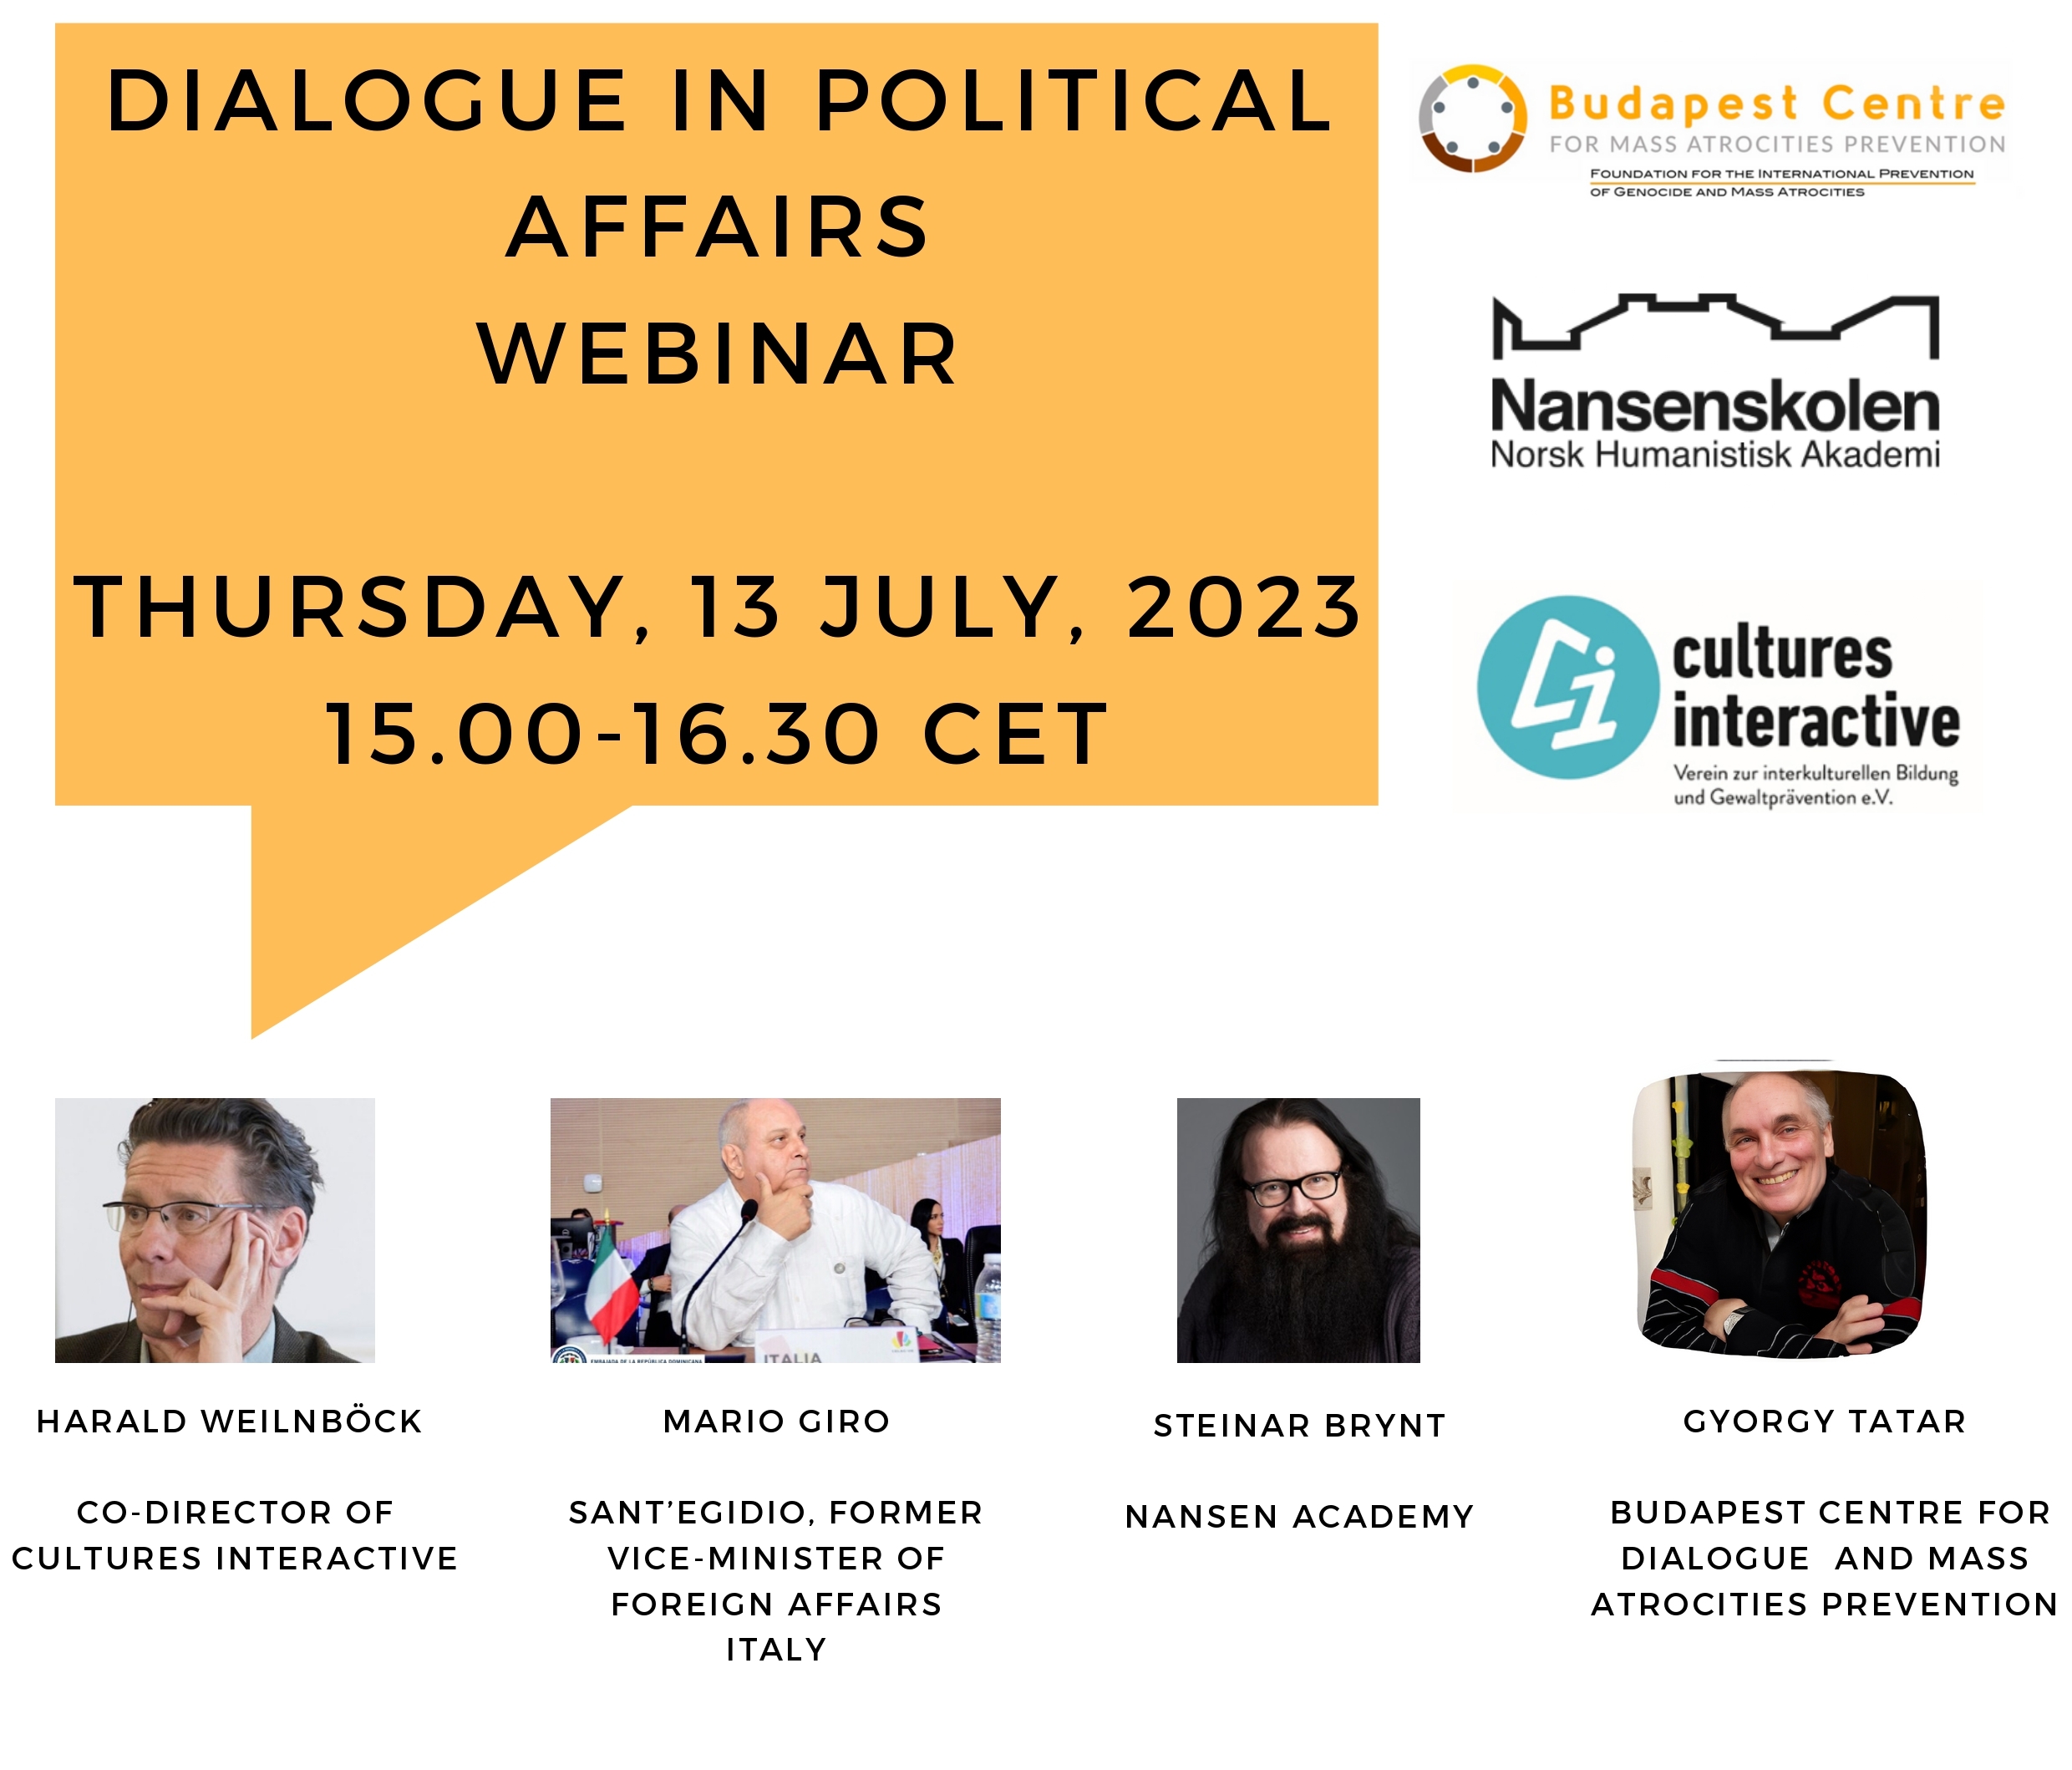 1ReminderDialogue in Political Affairs WEBINAR TUESDAY 13 JULY 2023 page 0001 1